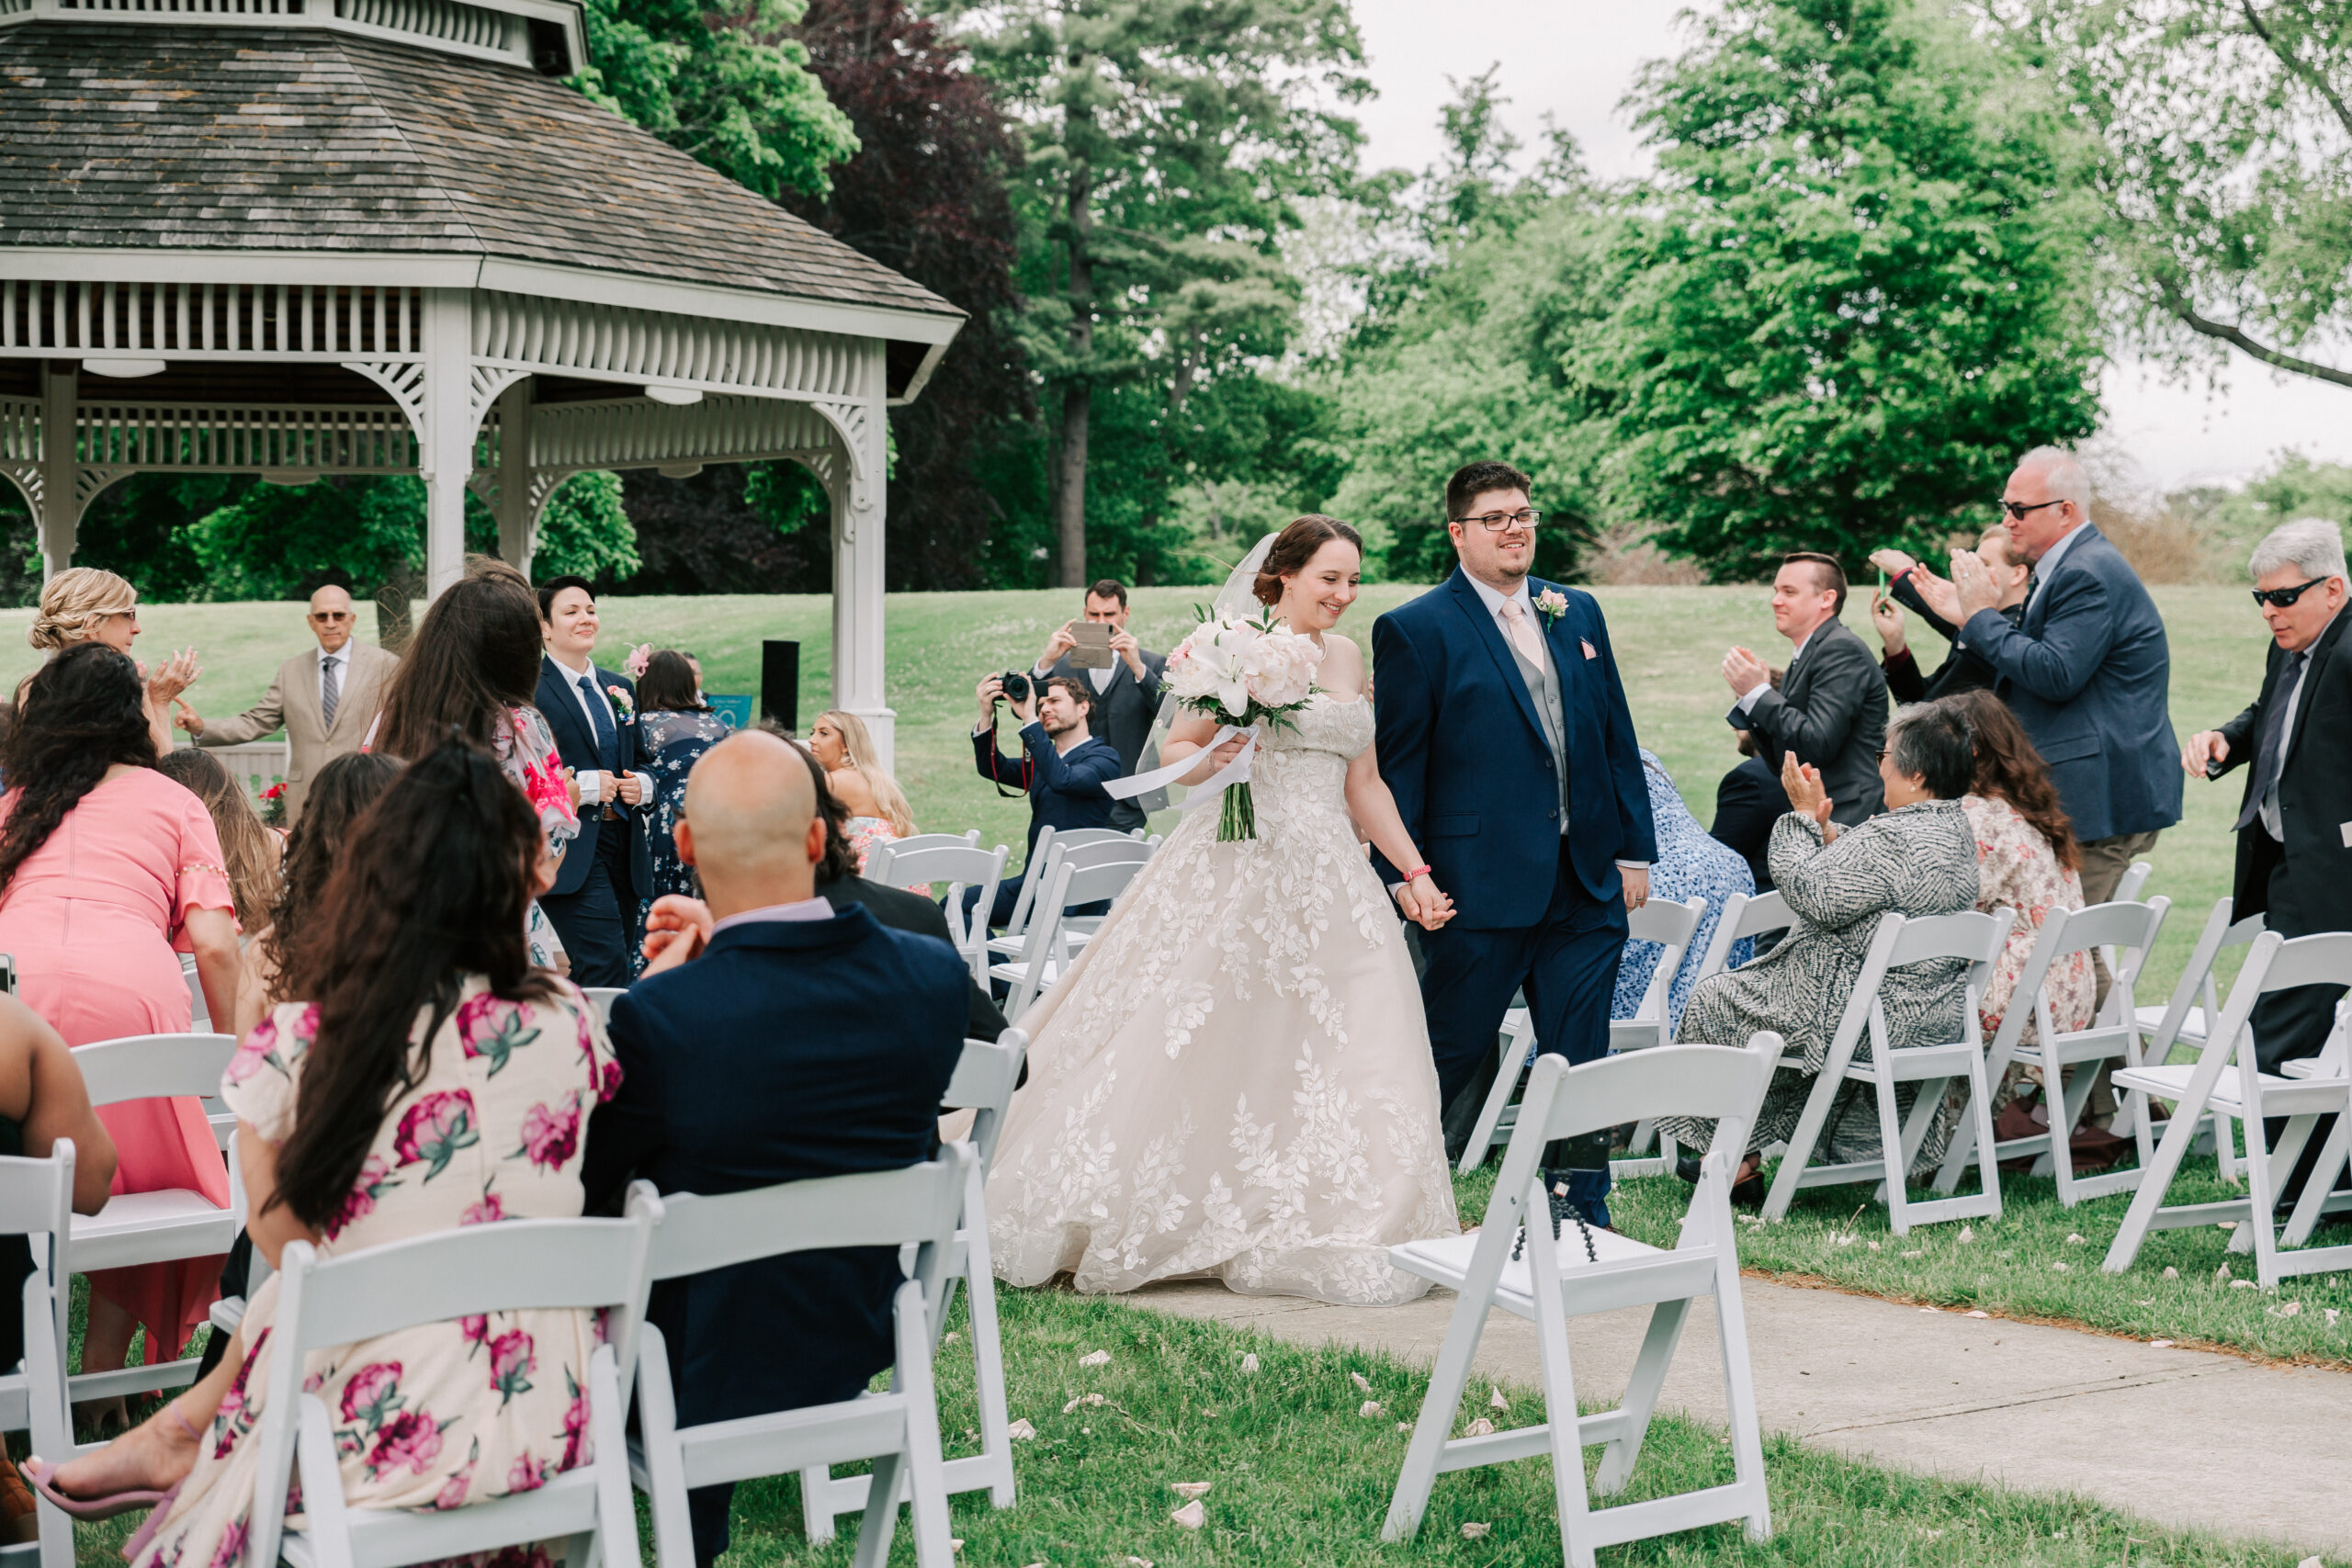 newlywed couple walking back down the aisle after getting married at the gazebo at Endicott Estate, a historic wedding venue in Massachusetts